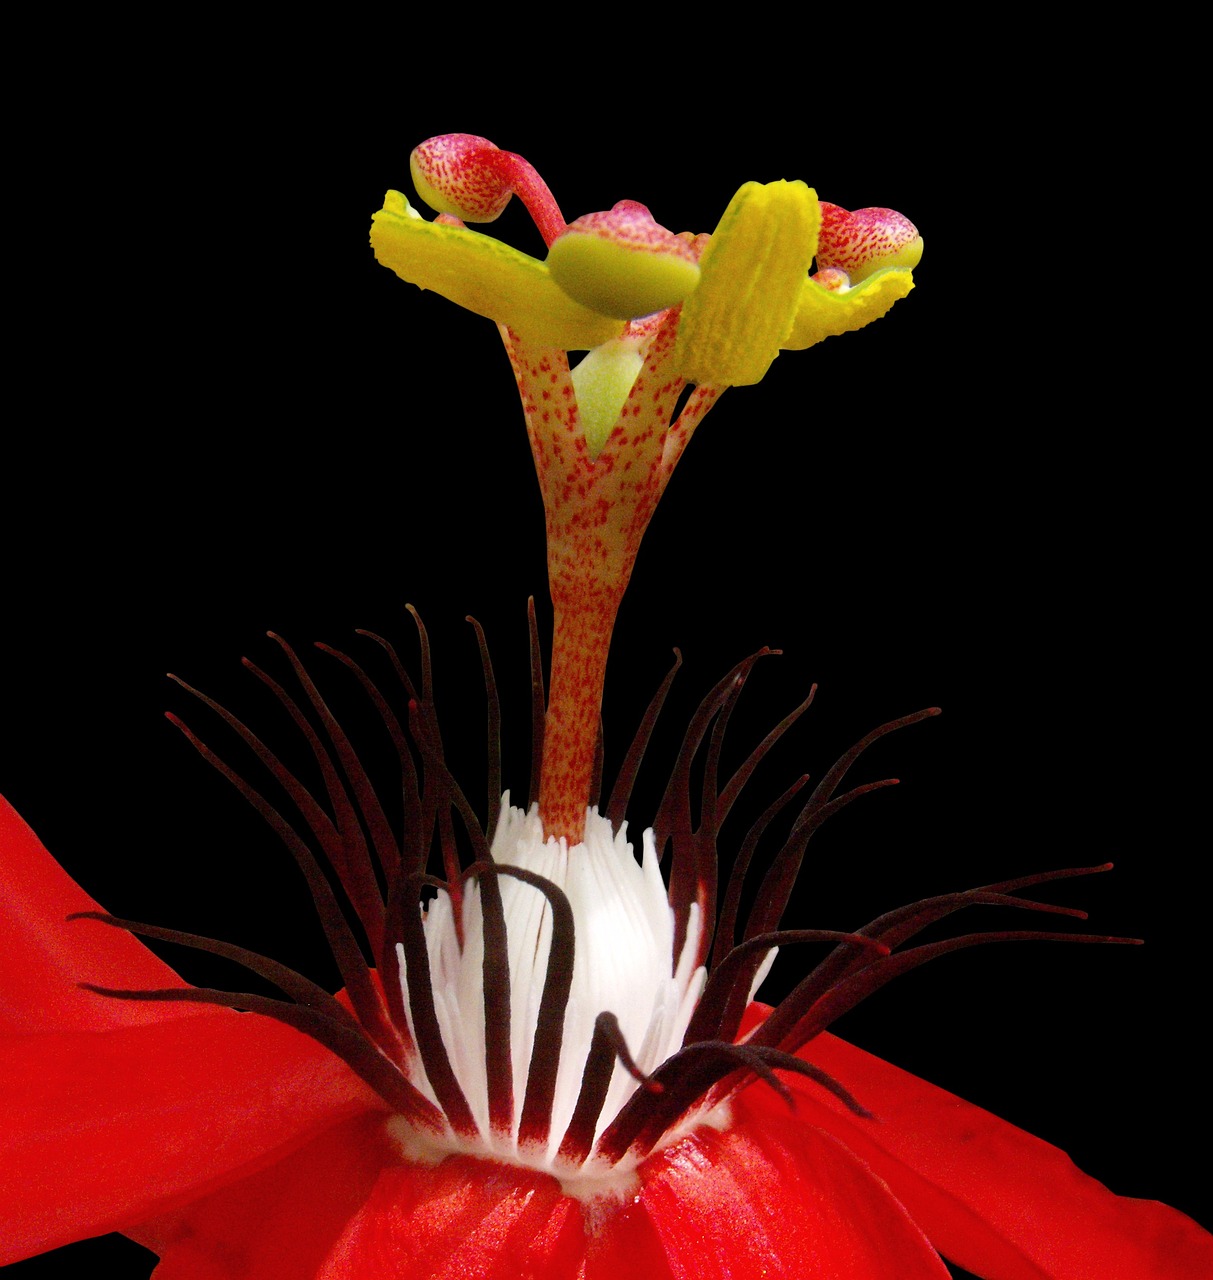 a close up of a red flower on a black background, a macro photograph, by Robert Brackman, passion flower, accurate detail, halyomorpha halys, highly detailed!